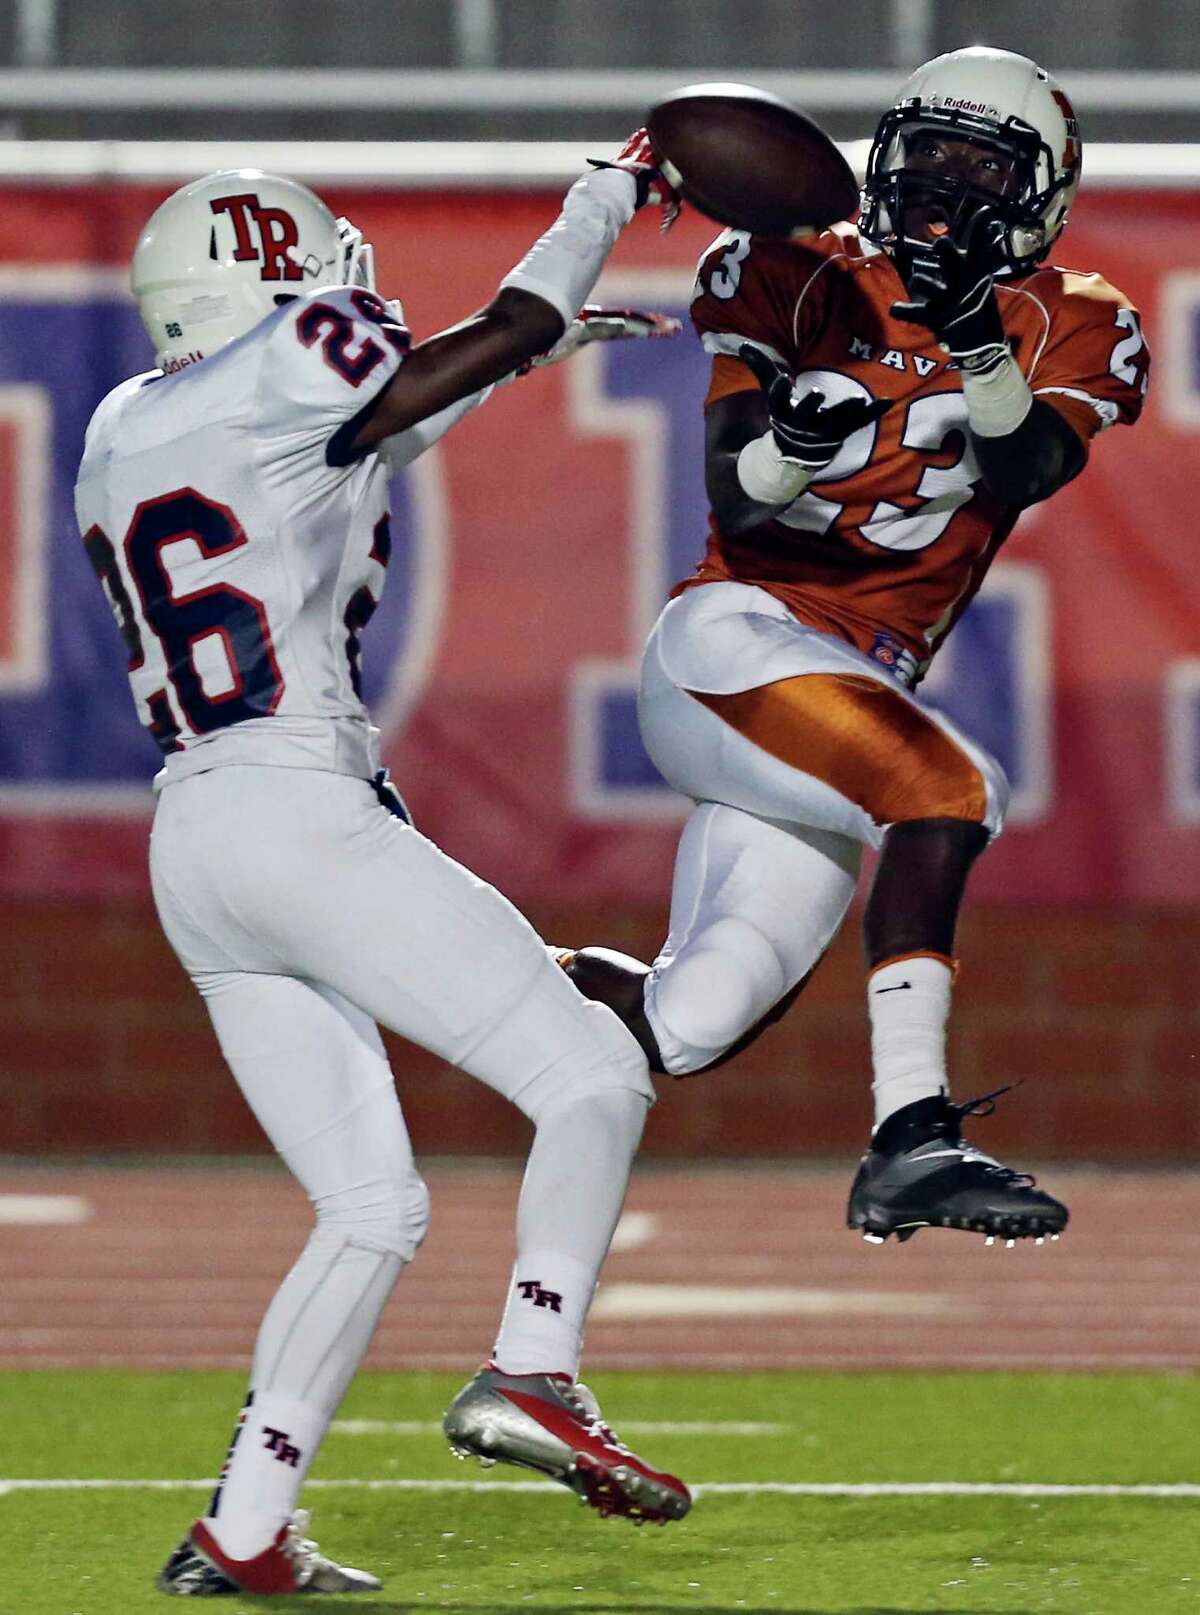 Madison's Ja'Michael Brown goes up for a pass as he is defended by Roosevelt's Will Porter during first half action Friday Oct. 4, 2013 at Heroes Stadium. The pass was incomplete.